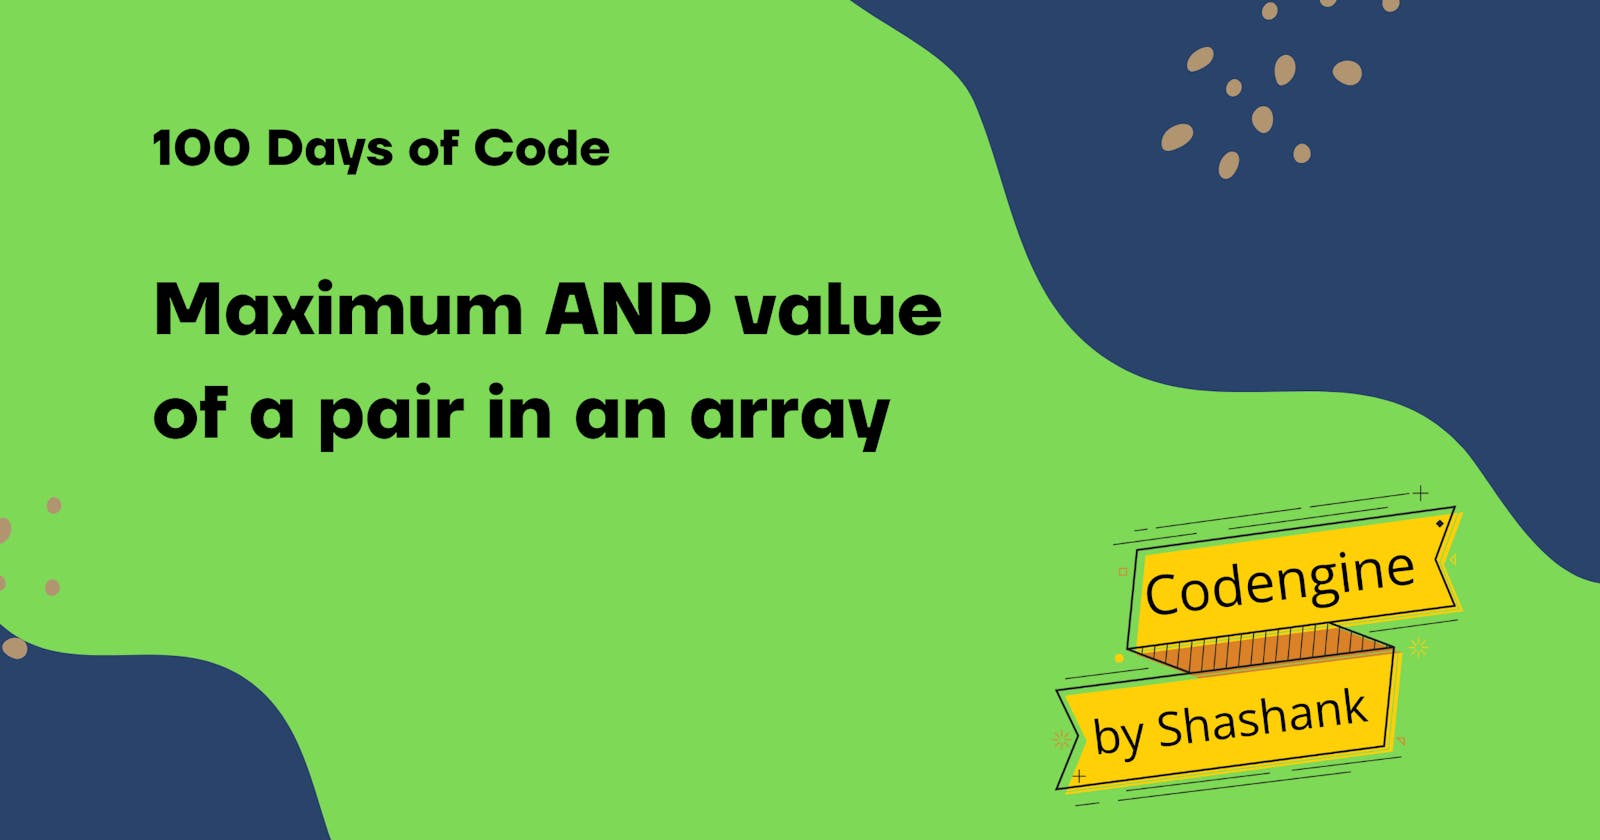 Maximum AND value of a pair in an array